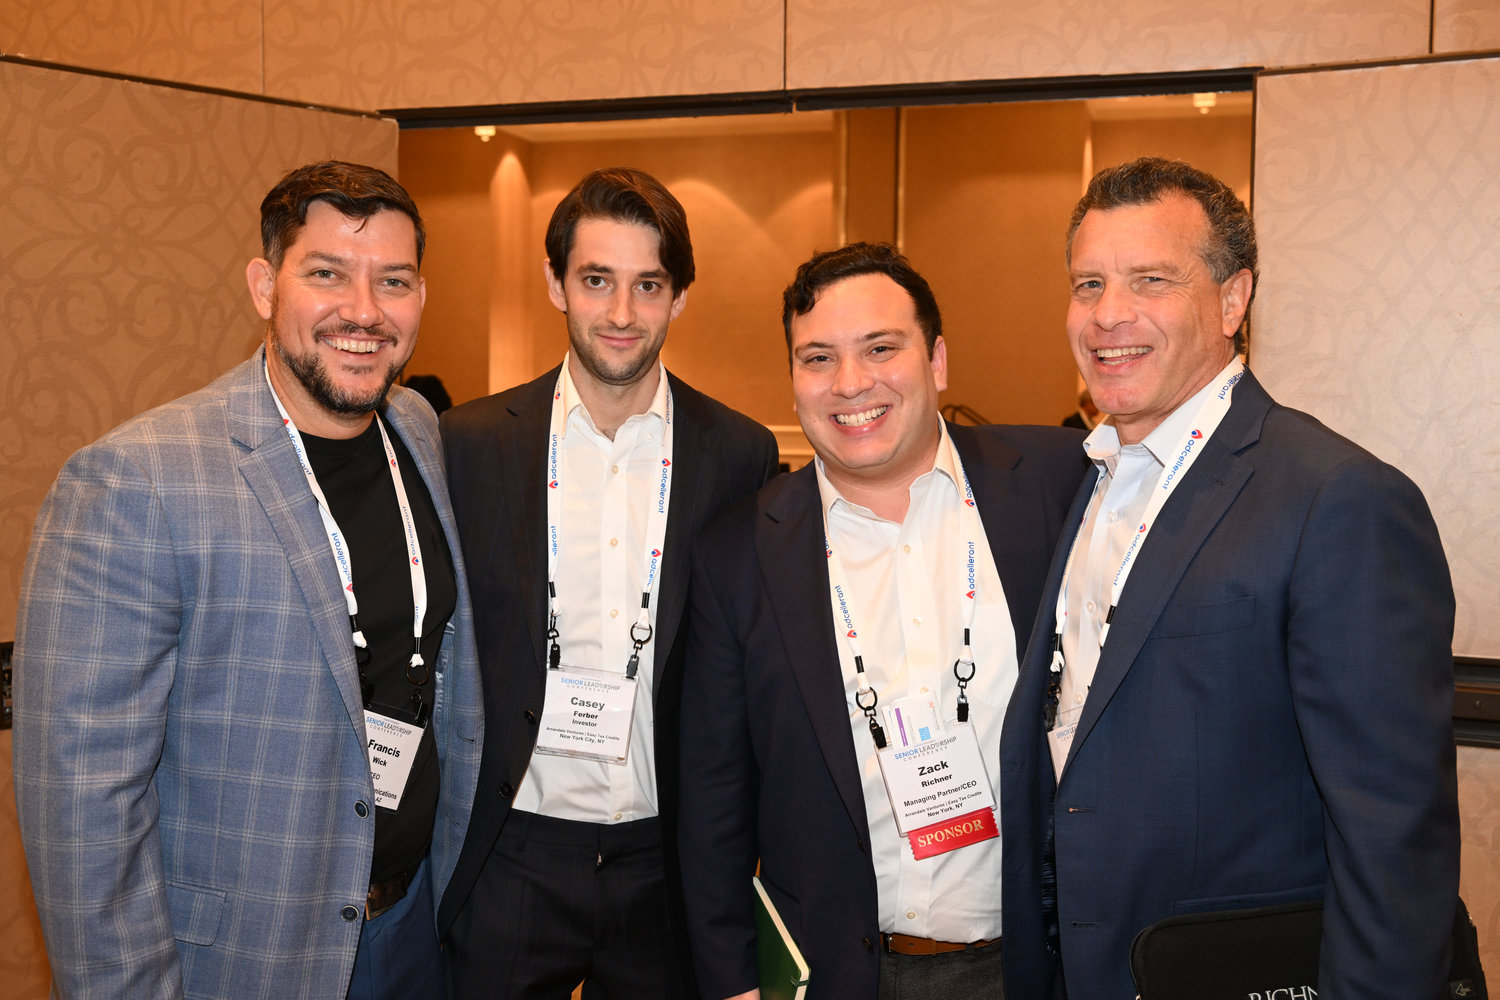 Francis Wick, CEO of Wick Communications; Casey Ferber, investor, Arrandale Ventures | Easy Tax Credits; Zack Richner, managing partner/CEO, Arrandale Ventures | Easy Tax Credits; and Stuart Richner, president of Richner Communications, Inc. (Photo by Jeff Strout)